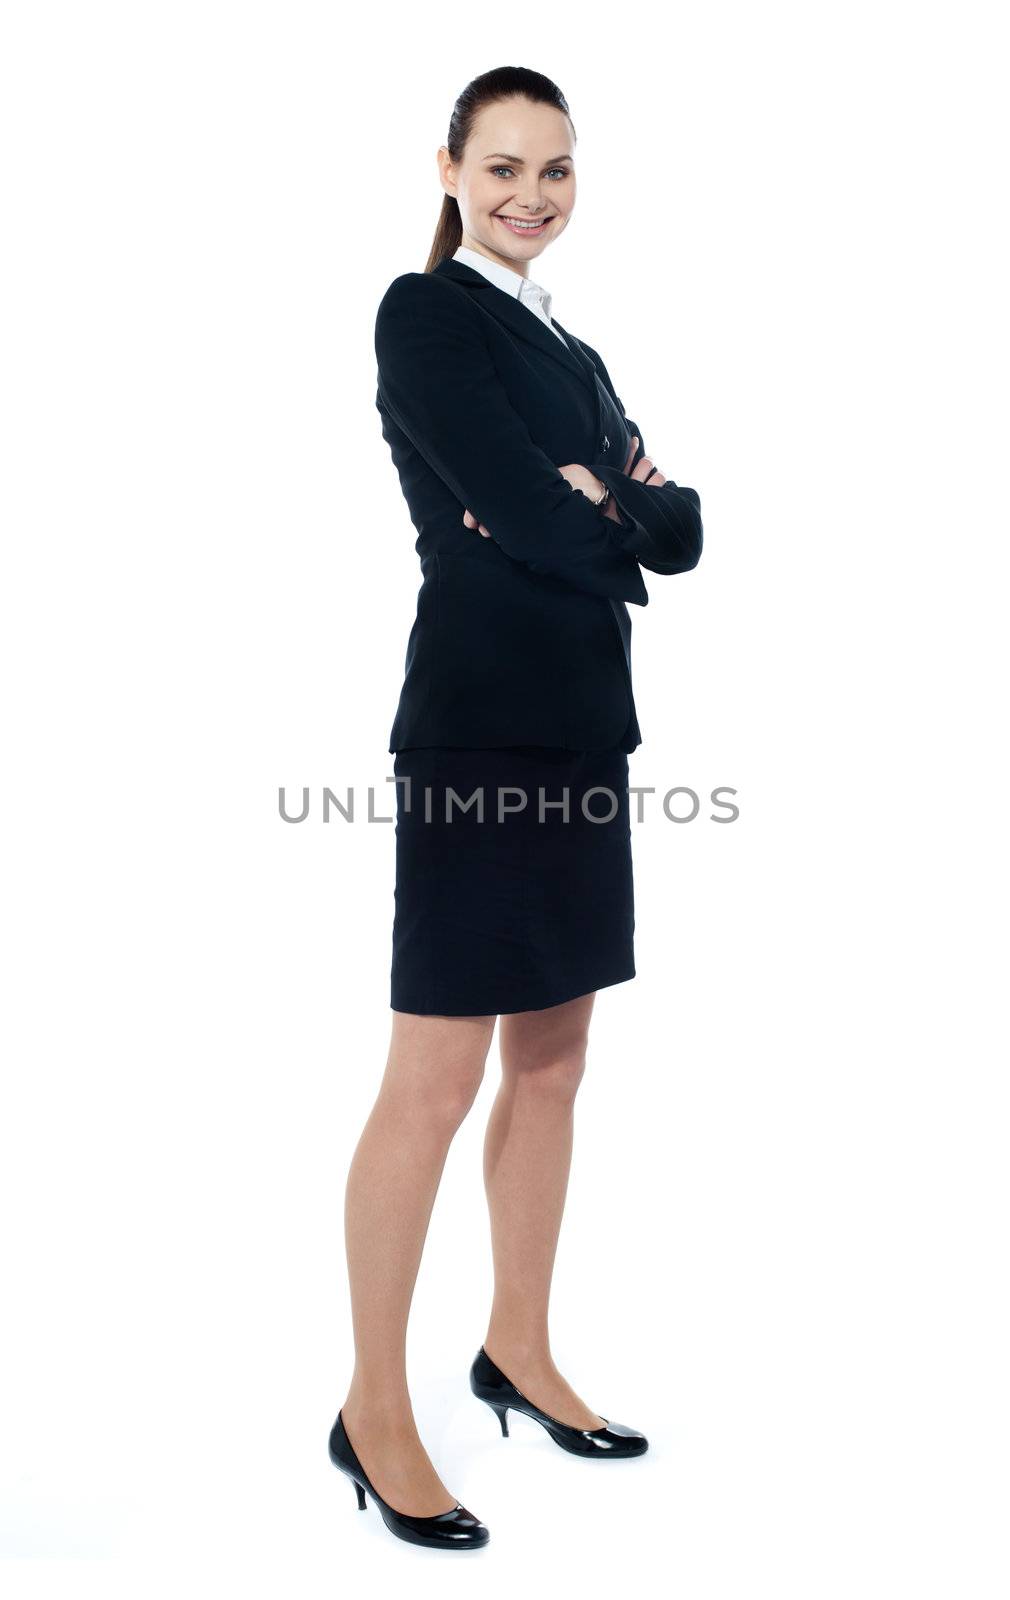 Confident ceo posing in style isolated over white